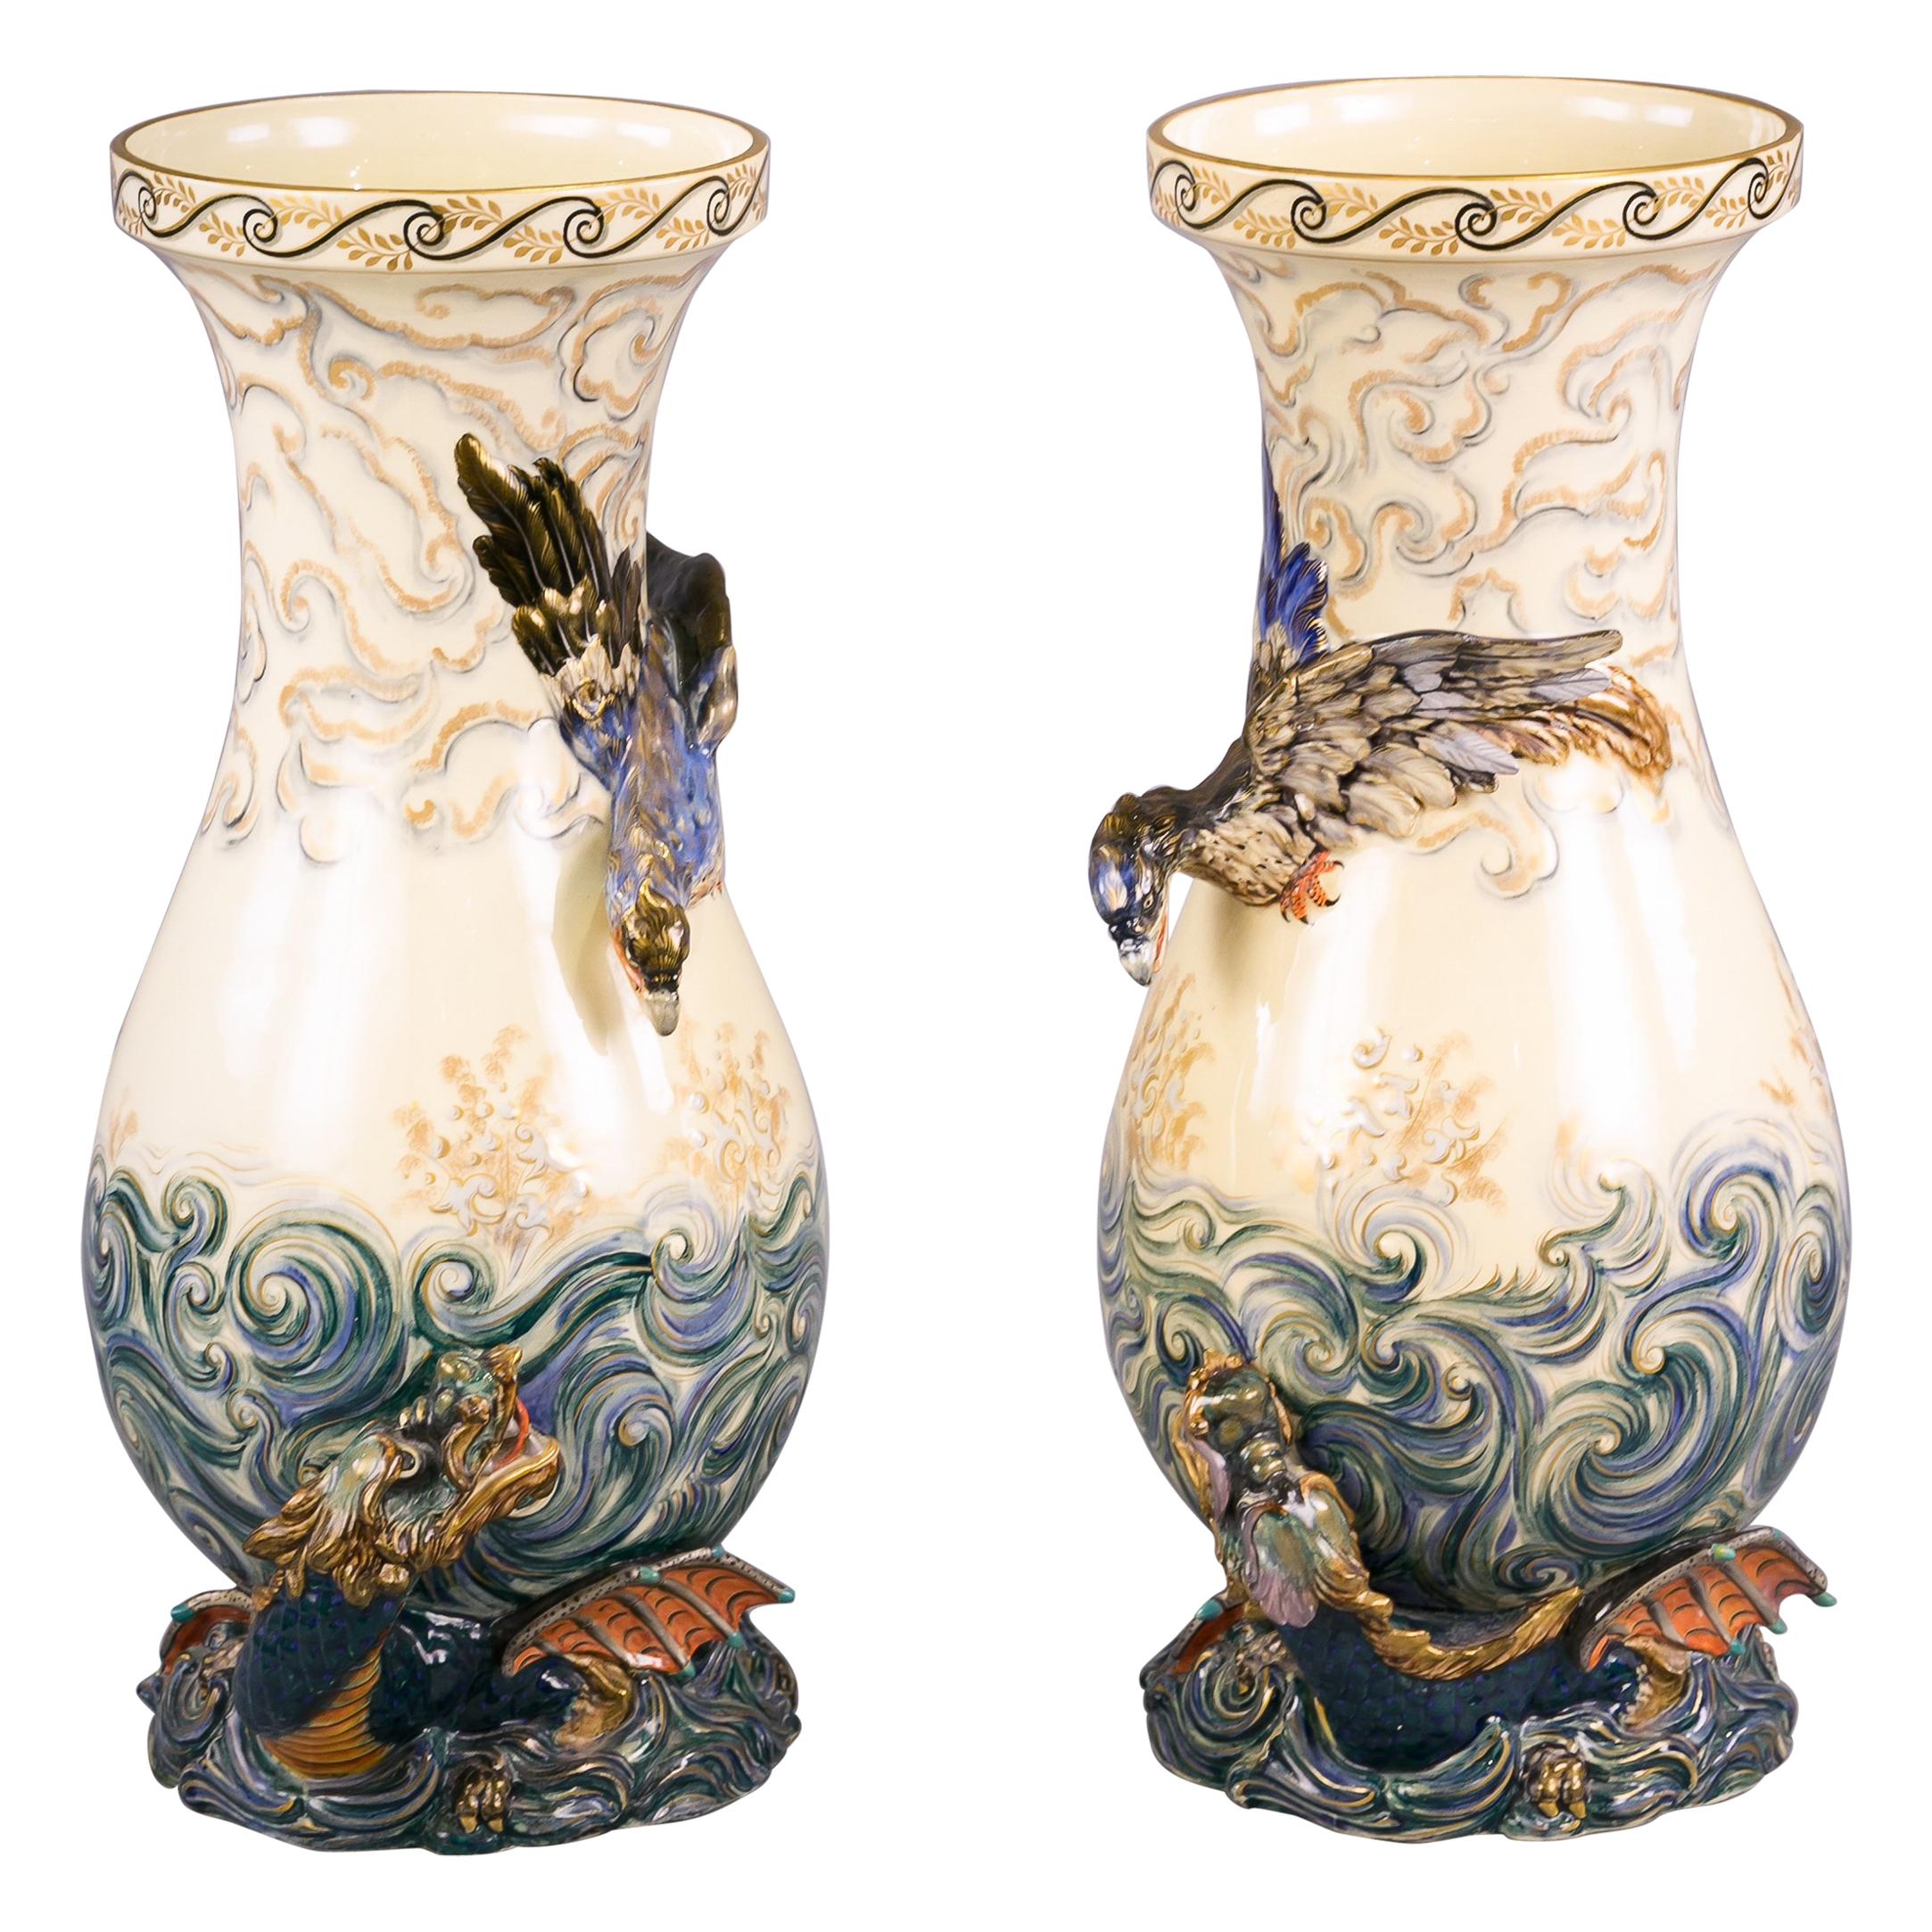 Pair of French Faience Vases, Luneville, circa 1875